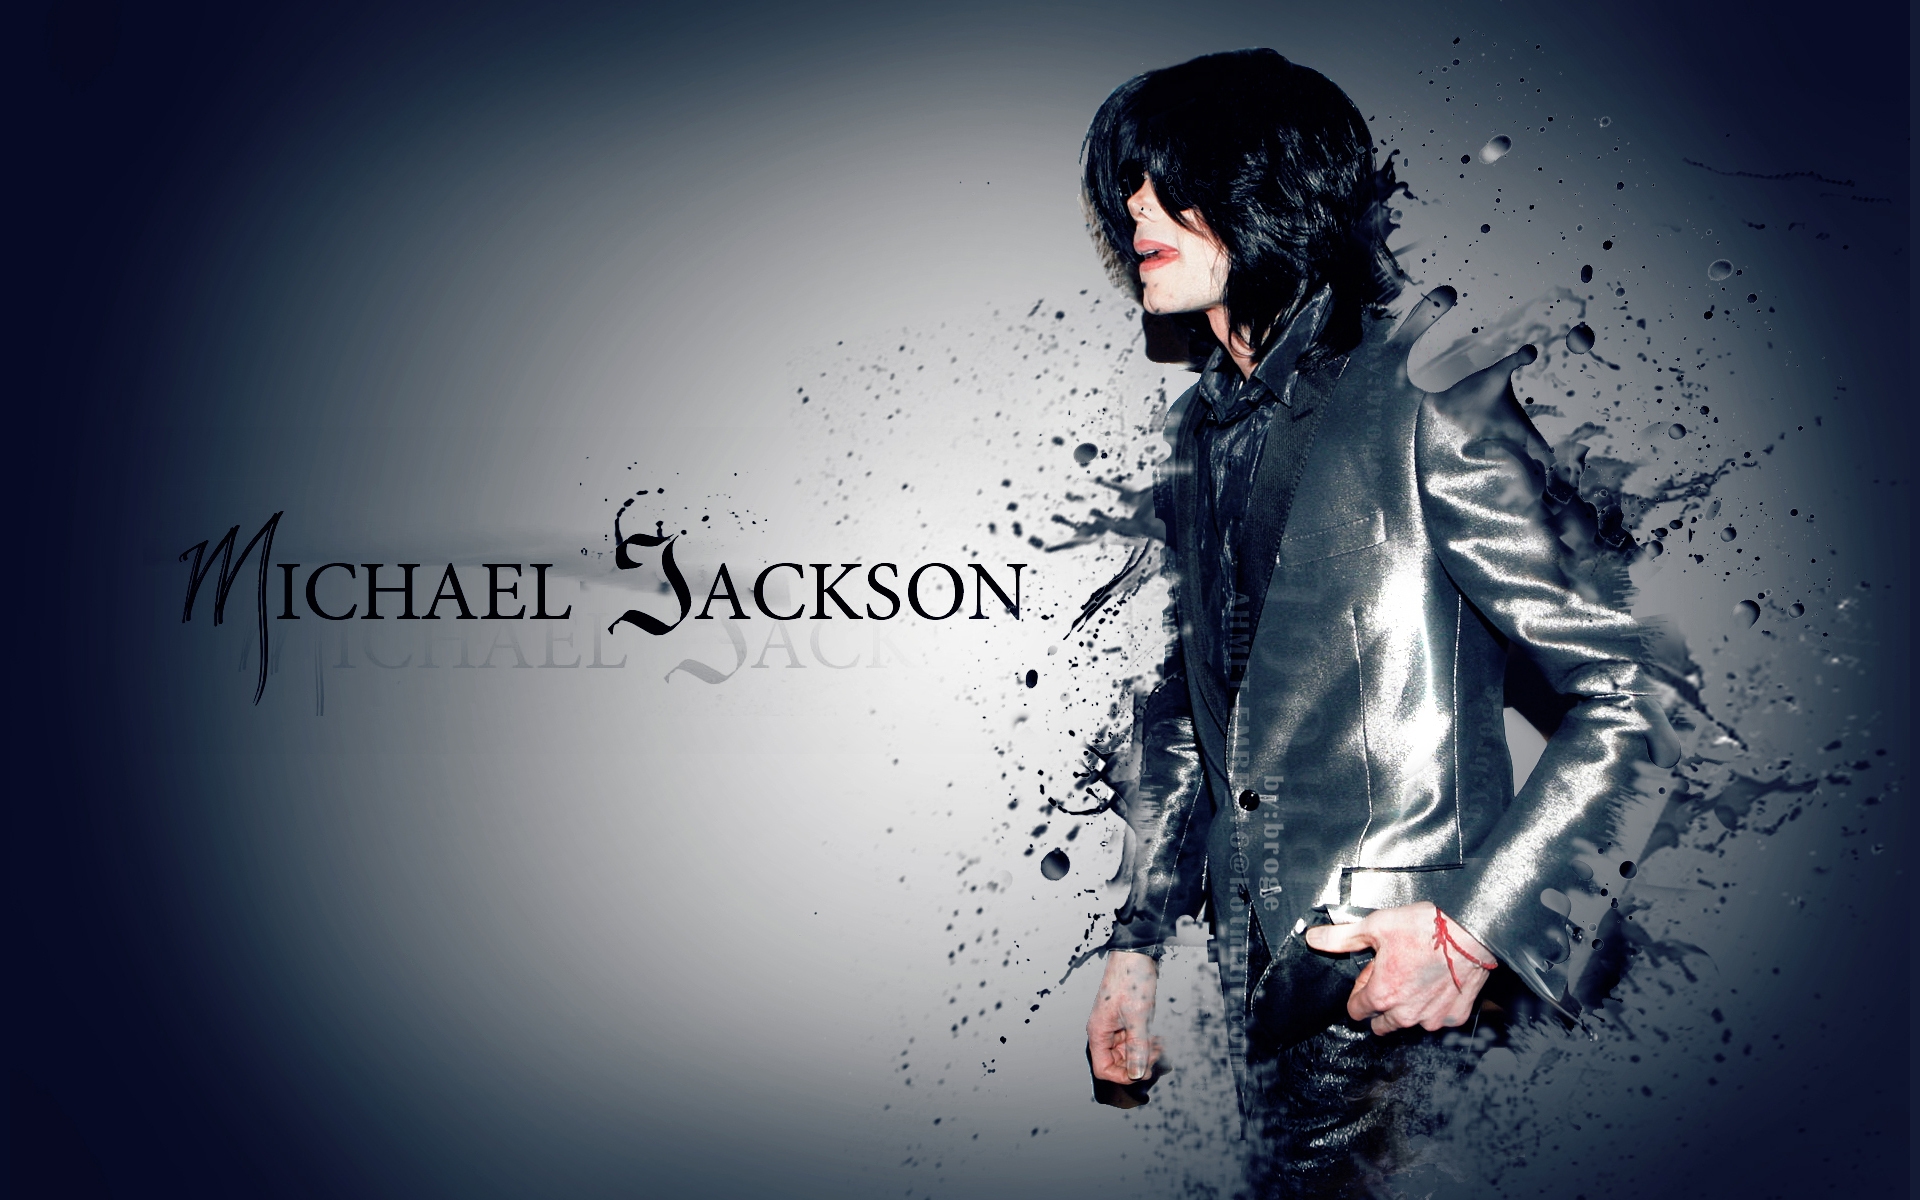 7680x43 Michael Jackson Glamorous Wallpapers 8k Wallpaper Hd Celebrities 4k Wallpapers Images Photos And Background